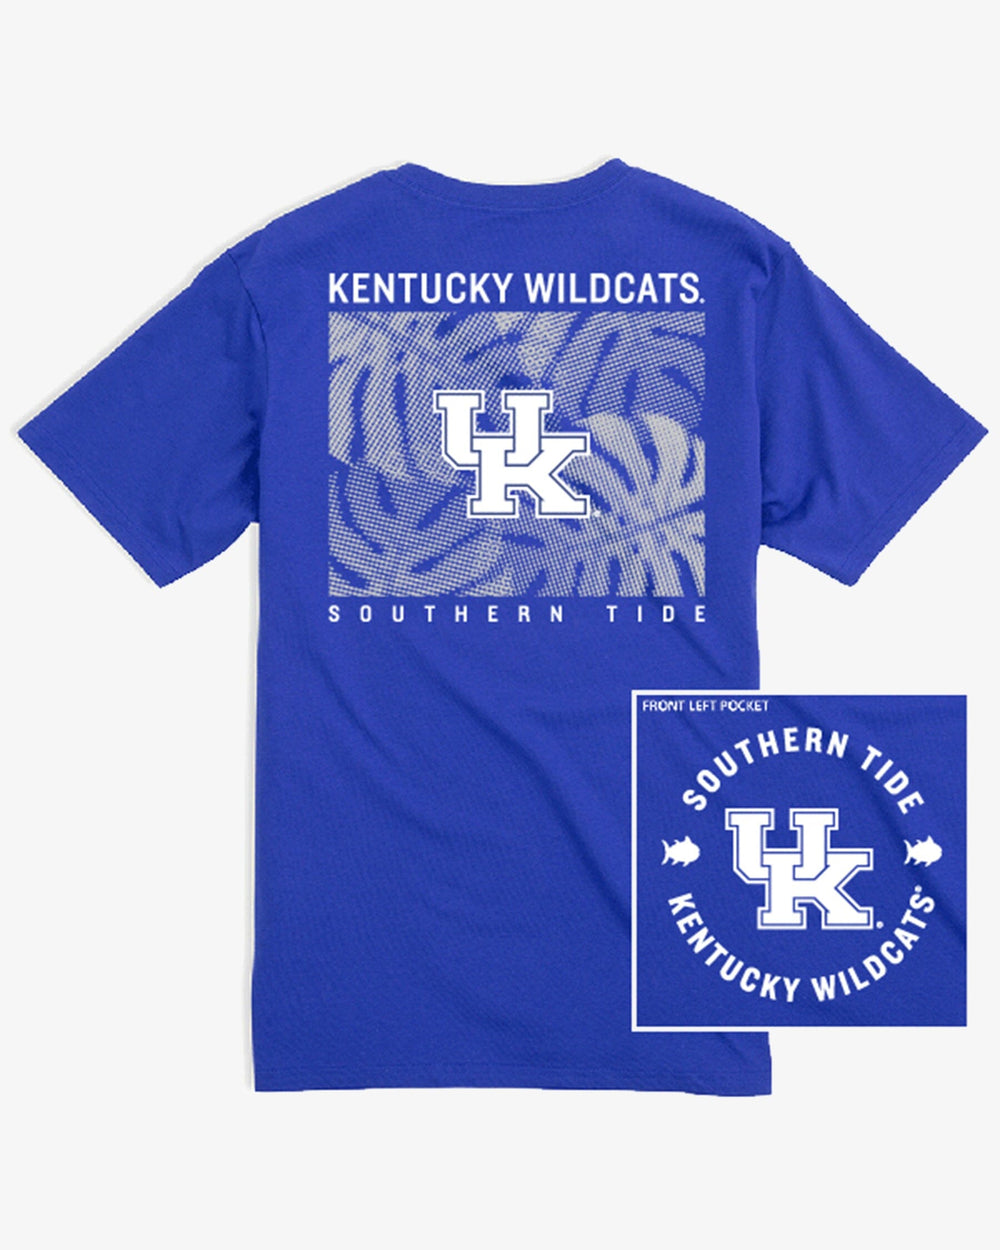 The front view of the Kentucky Wildcats Halftone Monstera T-Shirt by Southern Tide - University Blue